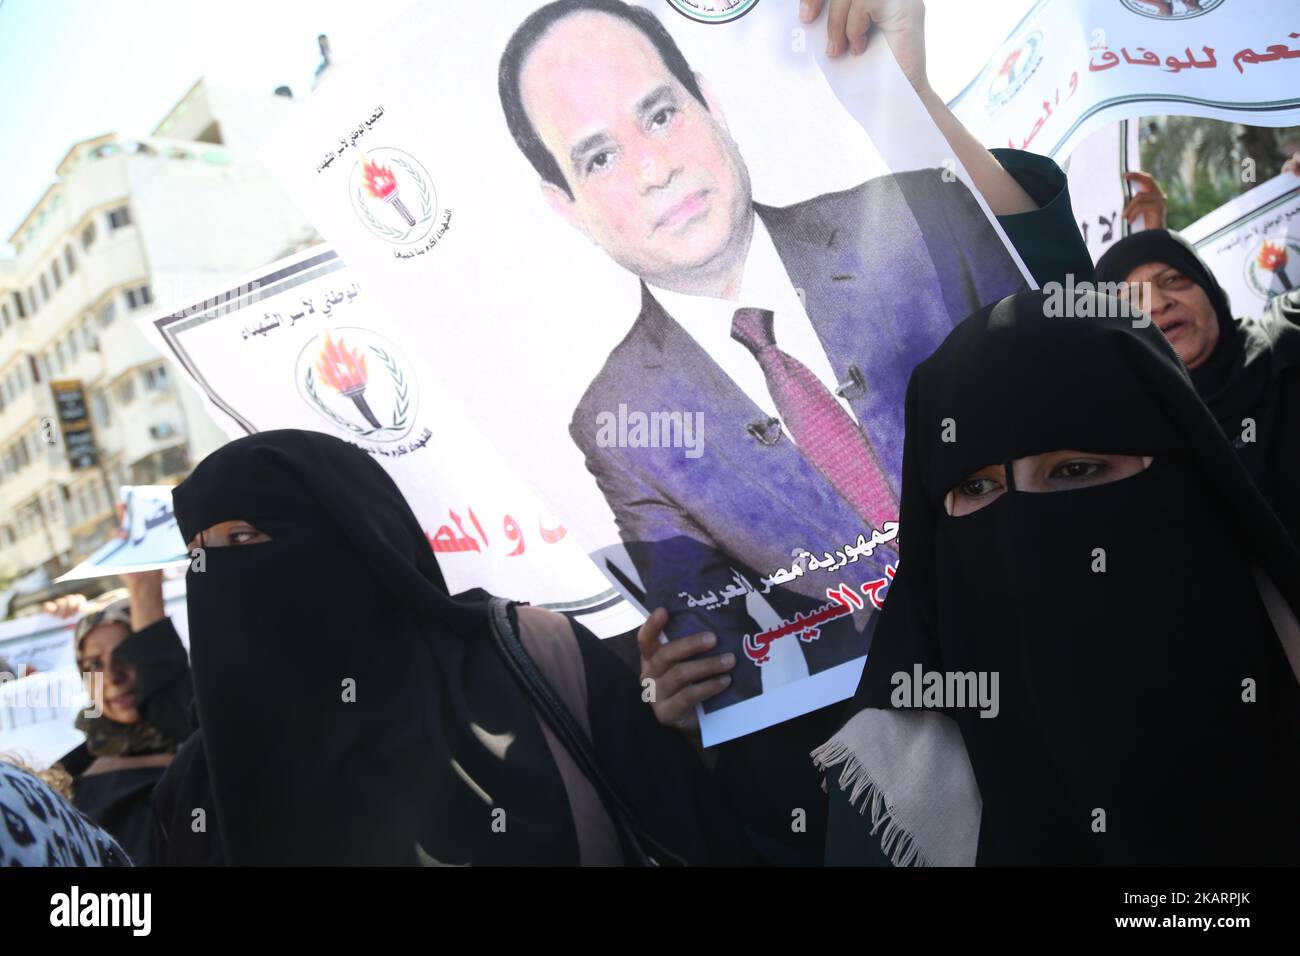 Residents hold pictures of Egyptian President Abdel-Fattah el-Sissi during the meeting of Palestinian Prime Minister Rami Hamdallah and Egyptian general intelligence chief Khaled Fawzy, at the Palestinian President Mahmoud Abbas' former official resident in Gaza City, Tuesday, Oct. 3, 2017. Hamdallah has held the first government meeting in Gaza as part of a major reconciliation effort to end the 10-year rift between Fatah and the militant Hamas group. (Photo by Majdi Fathi/NurPhoto) Stock Photo